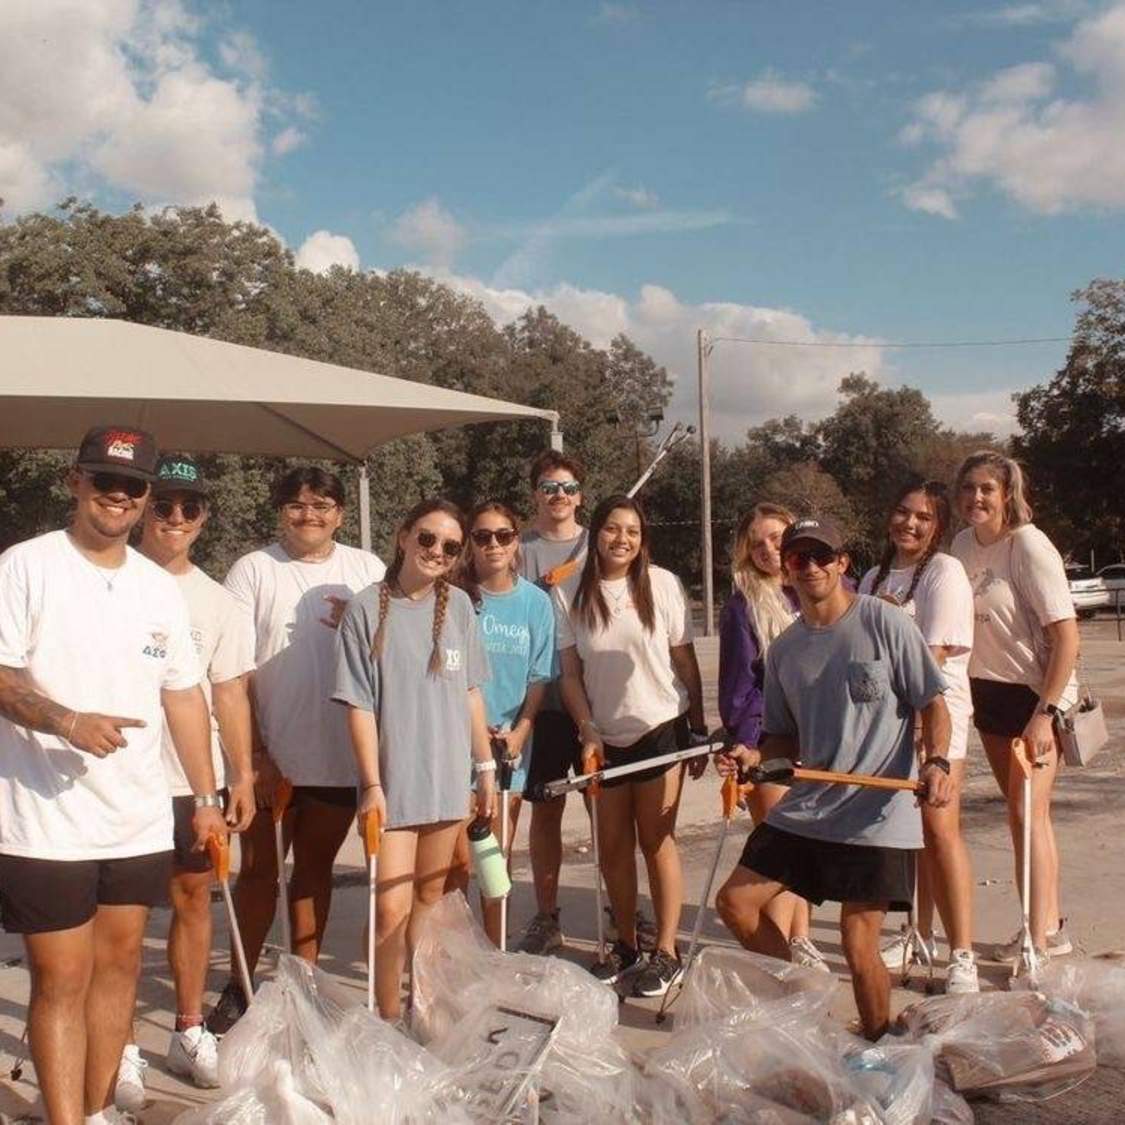 sorority and fraternity members with gathered trash